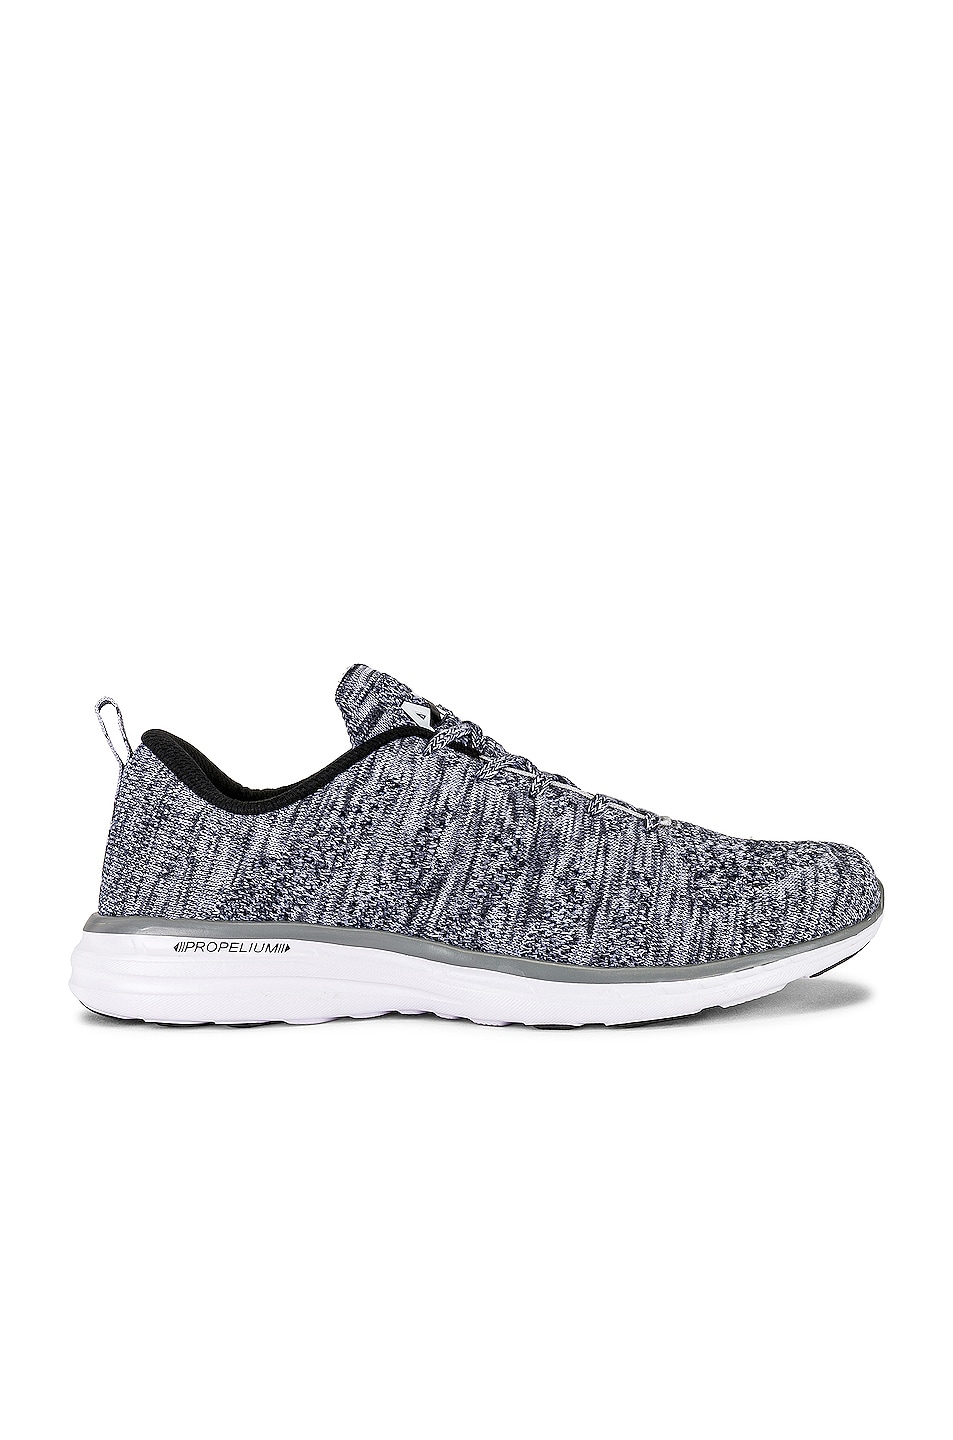 Image 1 of APL: Athletic Propulsion Labs Techloom Pro in Heather Grey